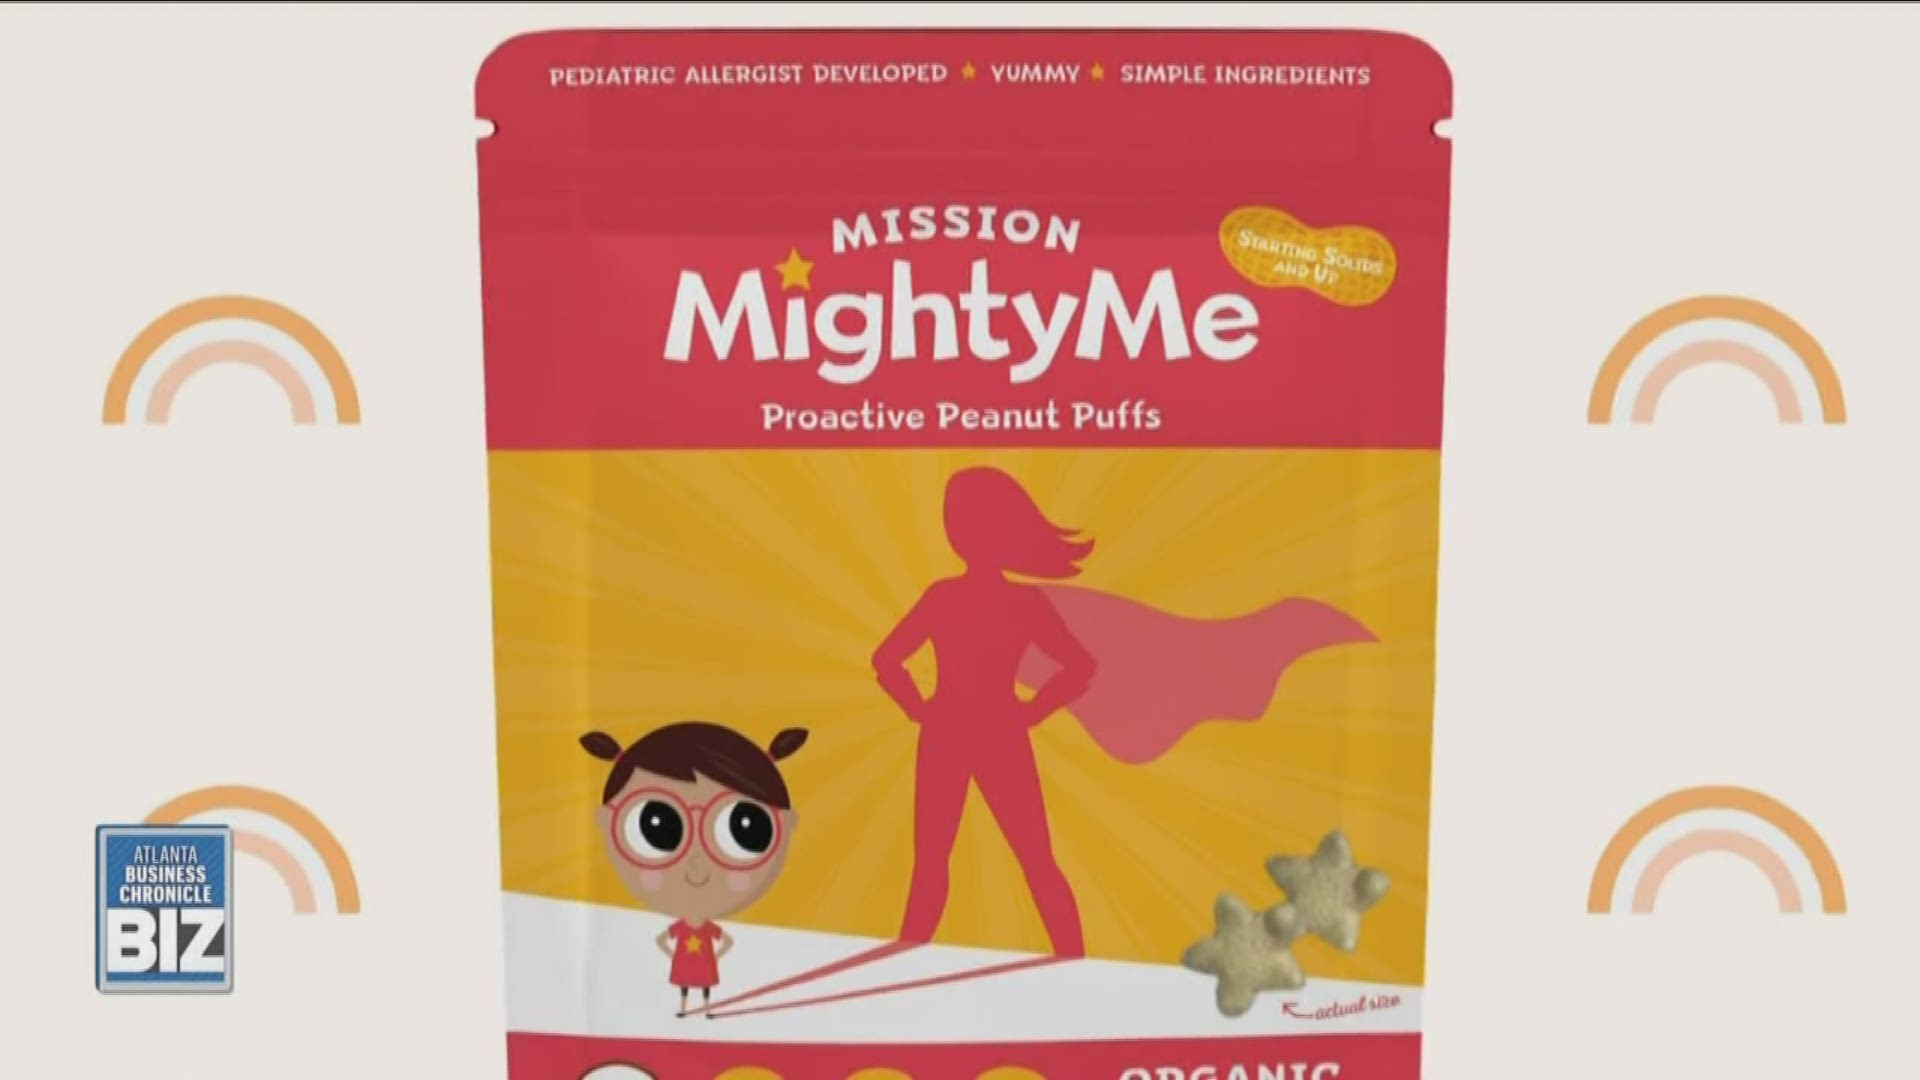 Preventing food allergies at an early age! Learn about Mission MightyMe on The Extra Mile, brought to you by goBeyondProfit.